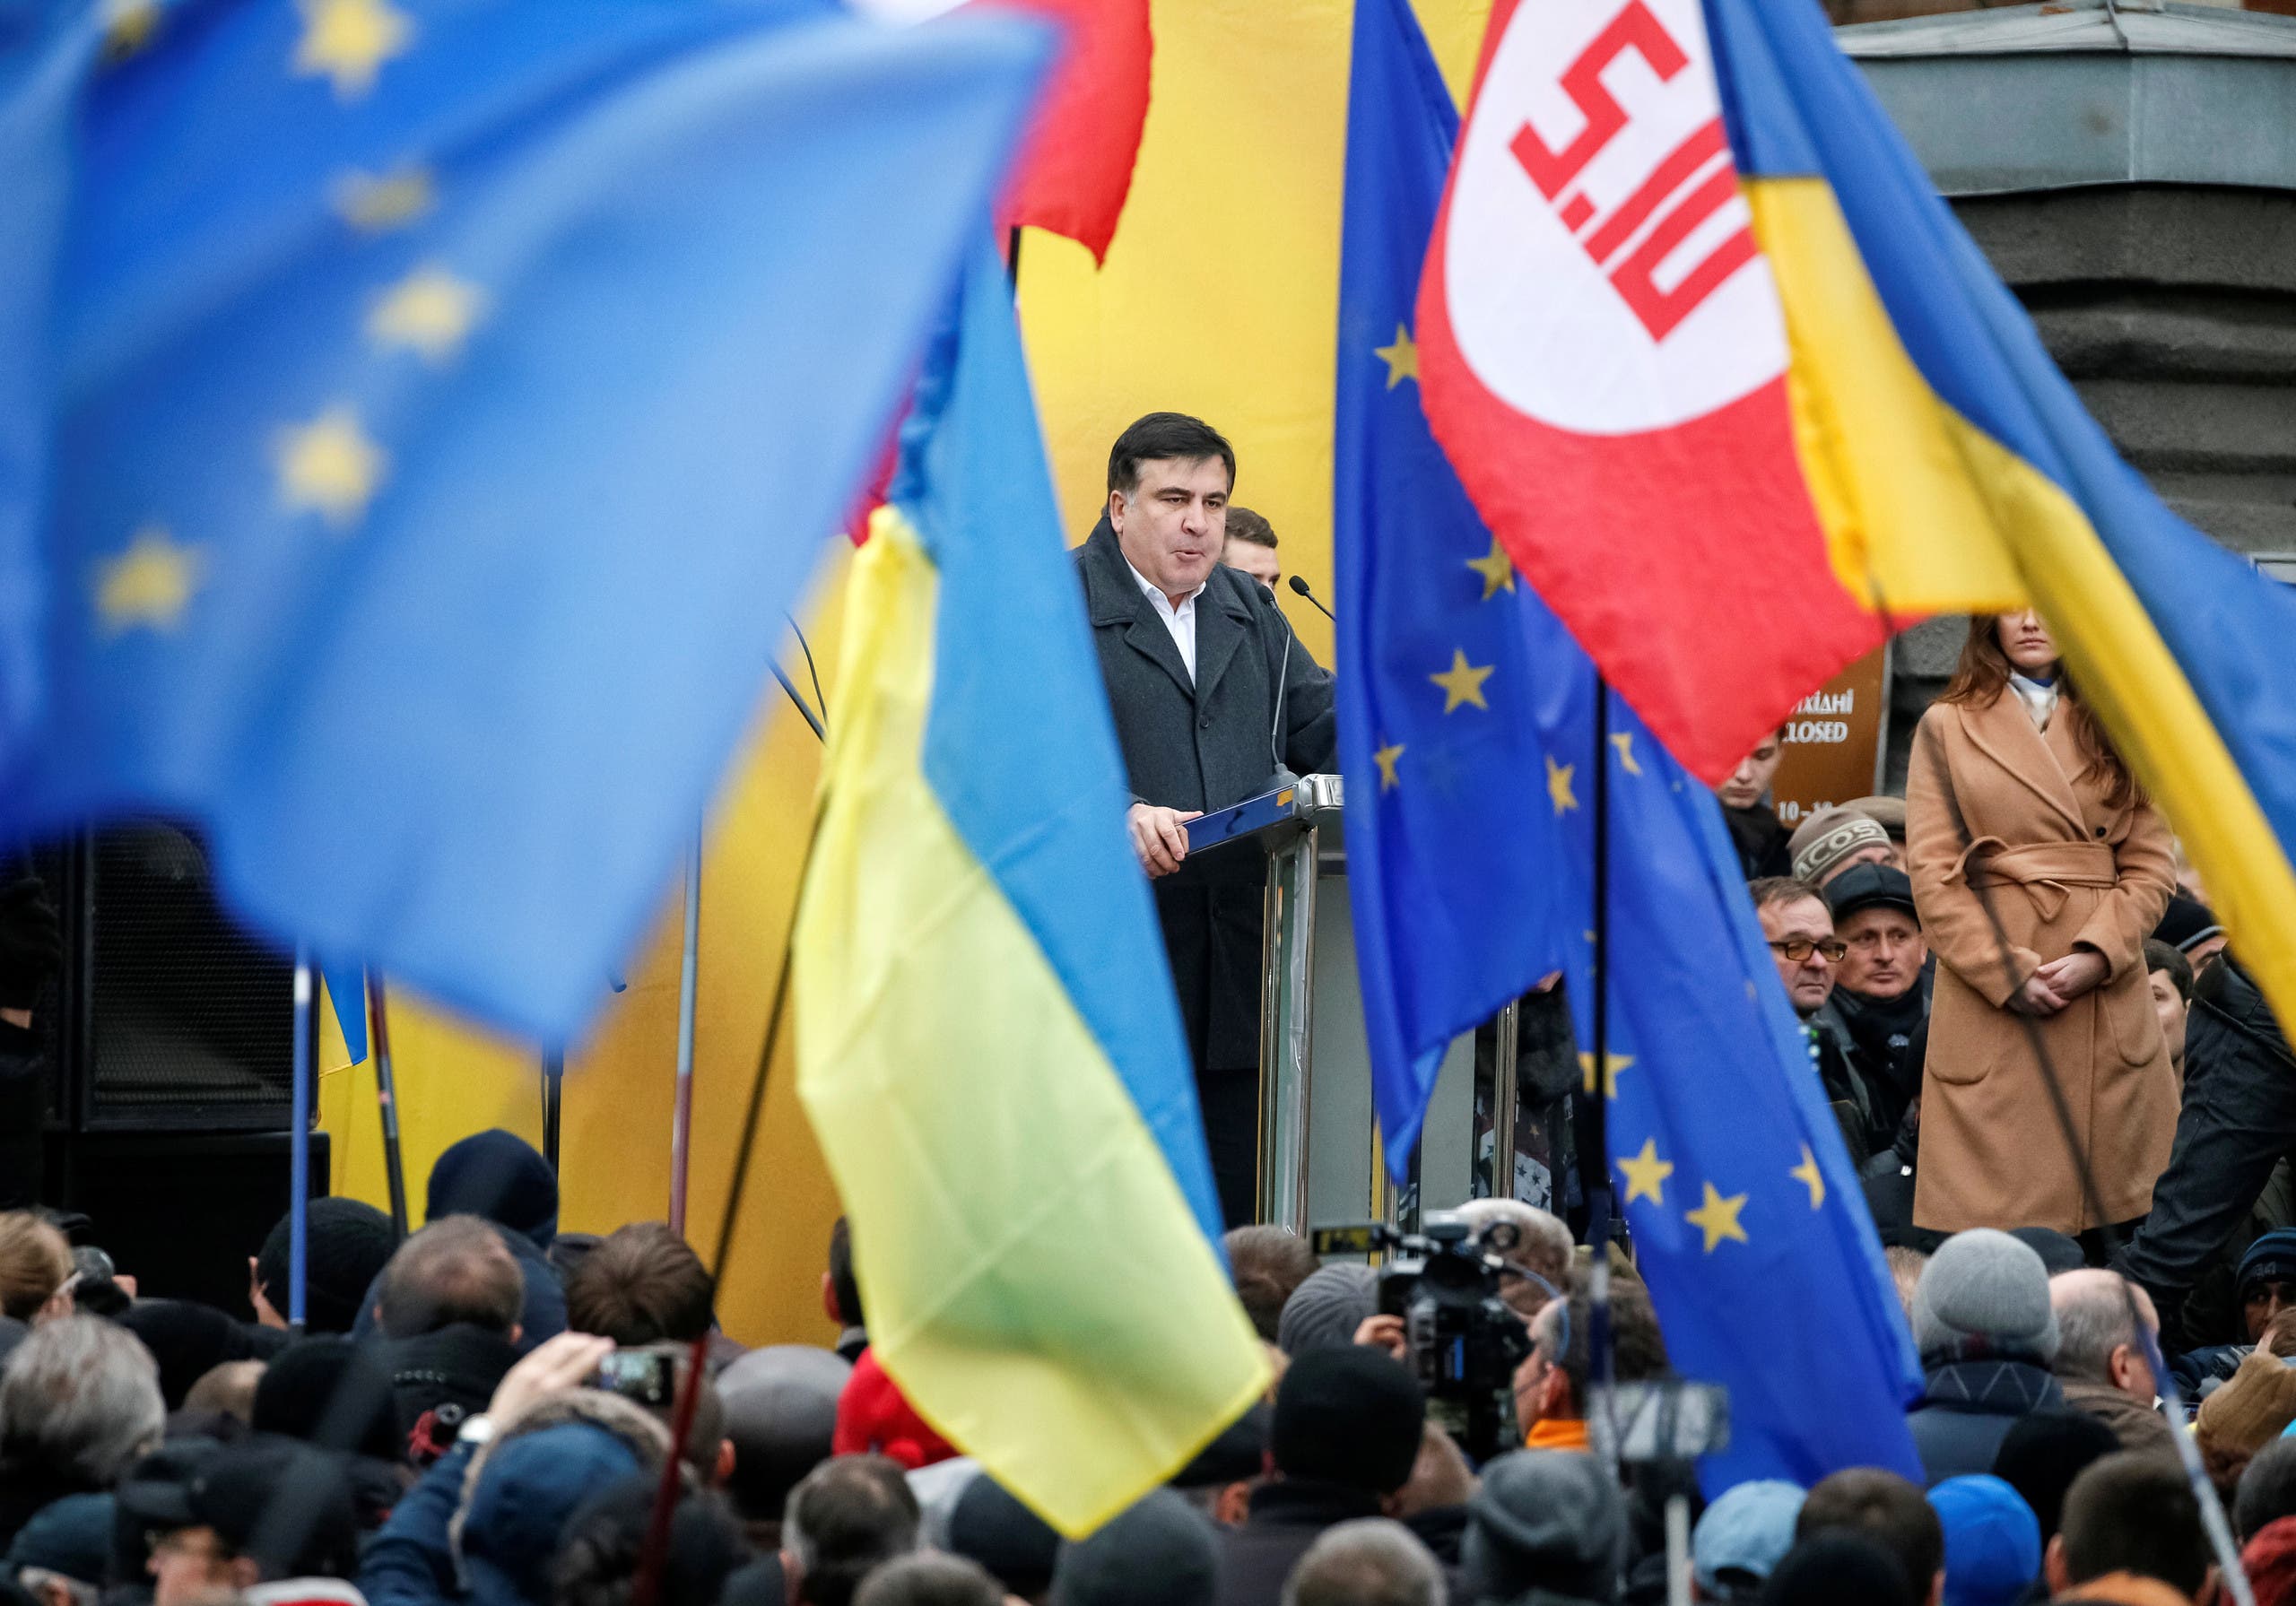 Saakashvili giving a speech in central Kyiv in 2016 as Governor of Odessa